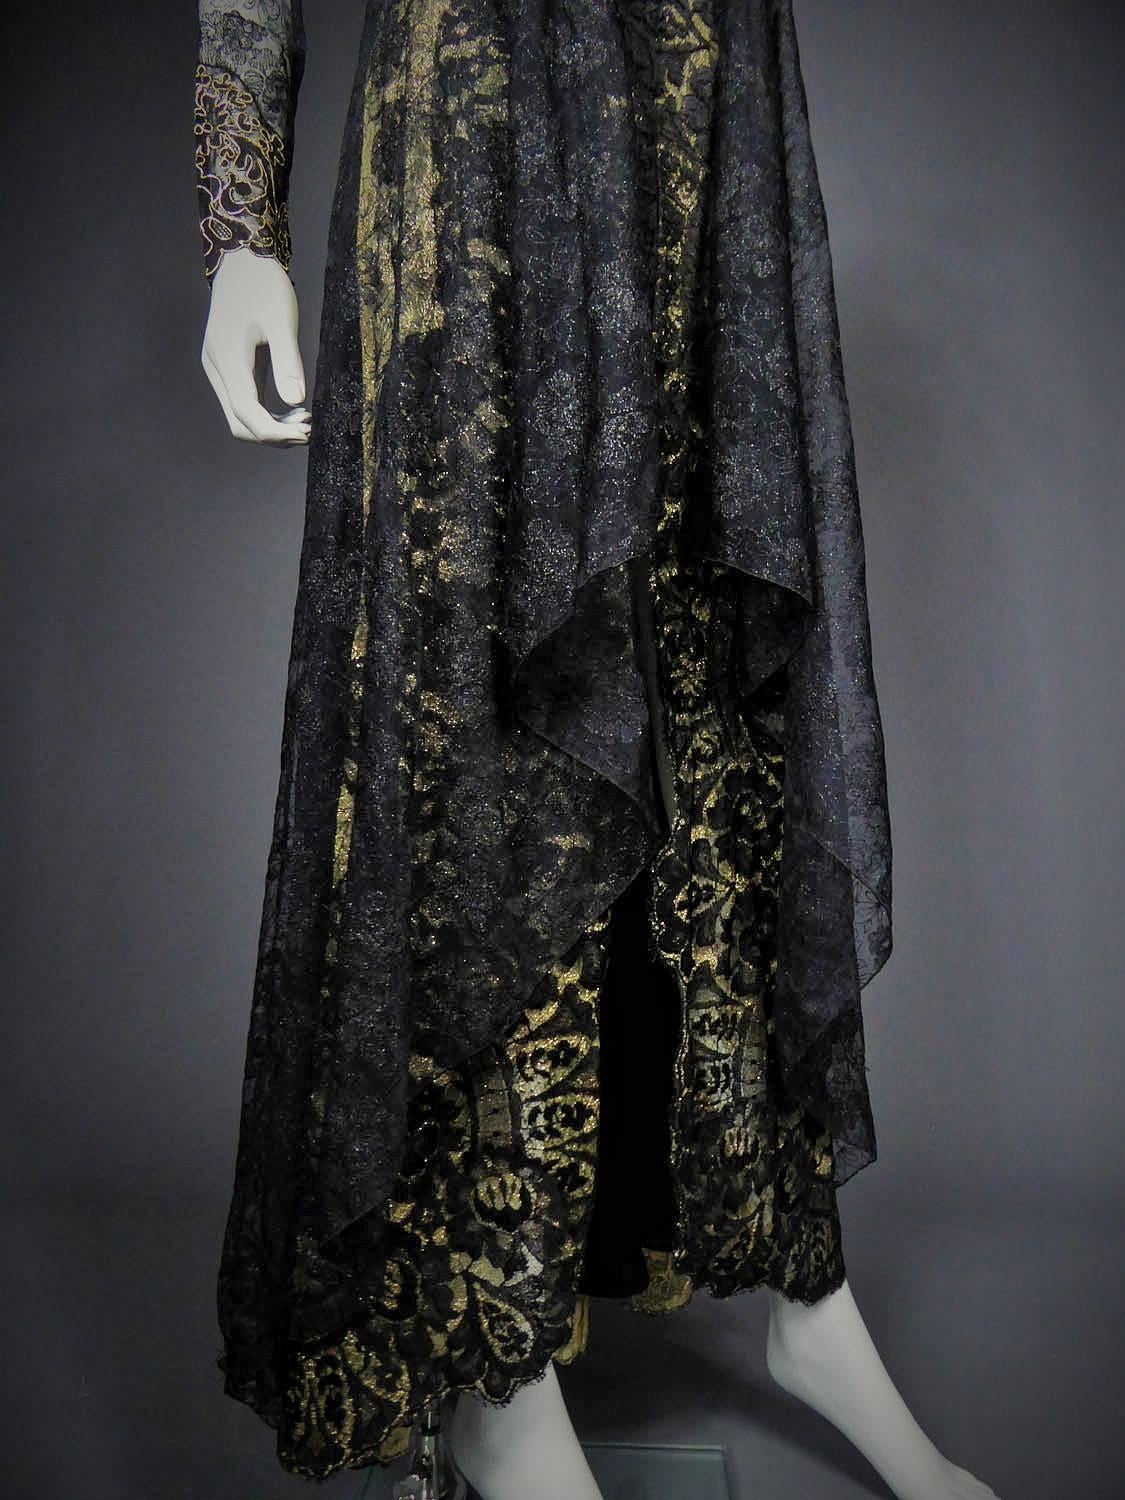 Women's Christian Lacroix Couture evening gown, circa 1990